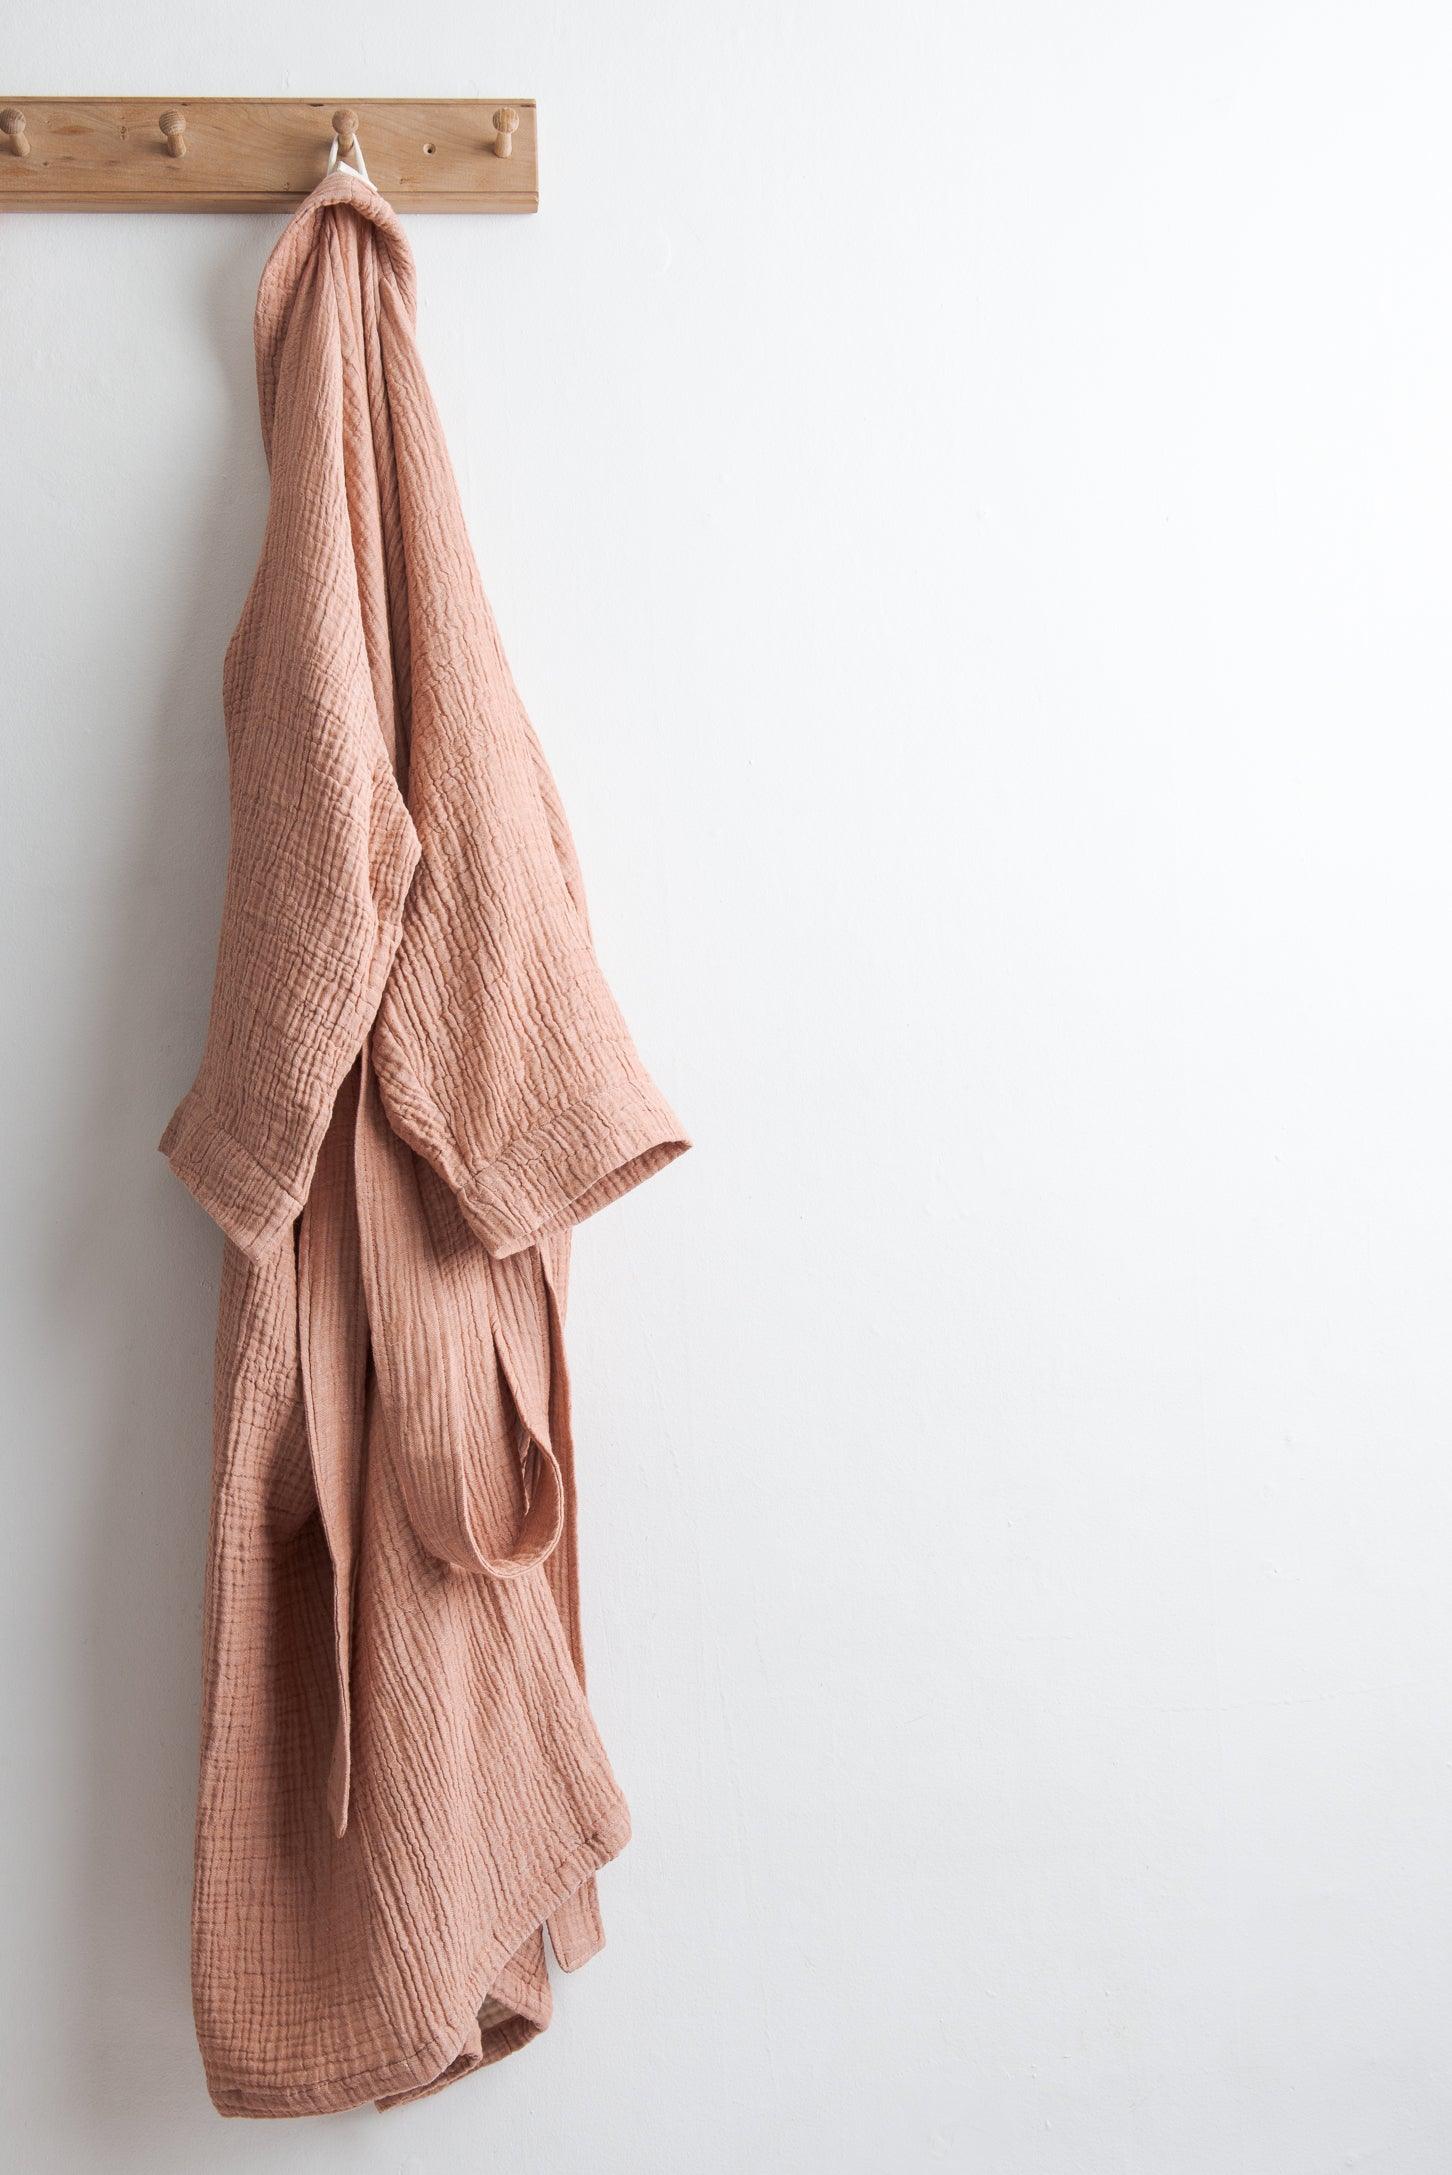 pink coloured cotton robe hung on a hook